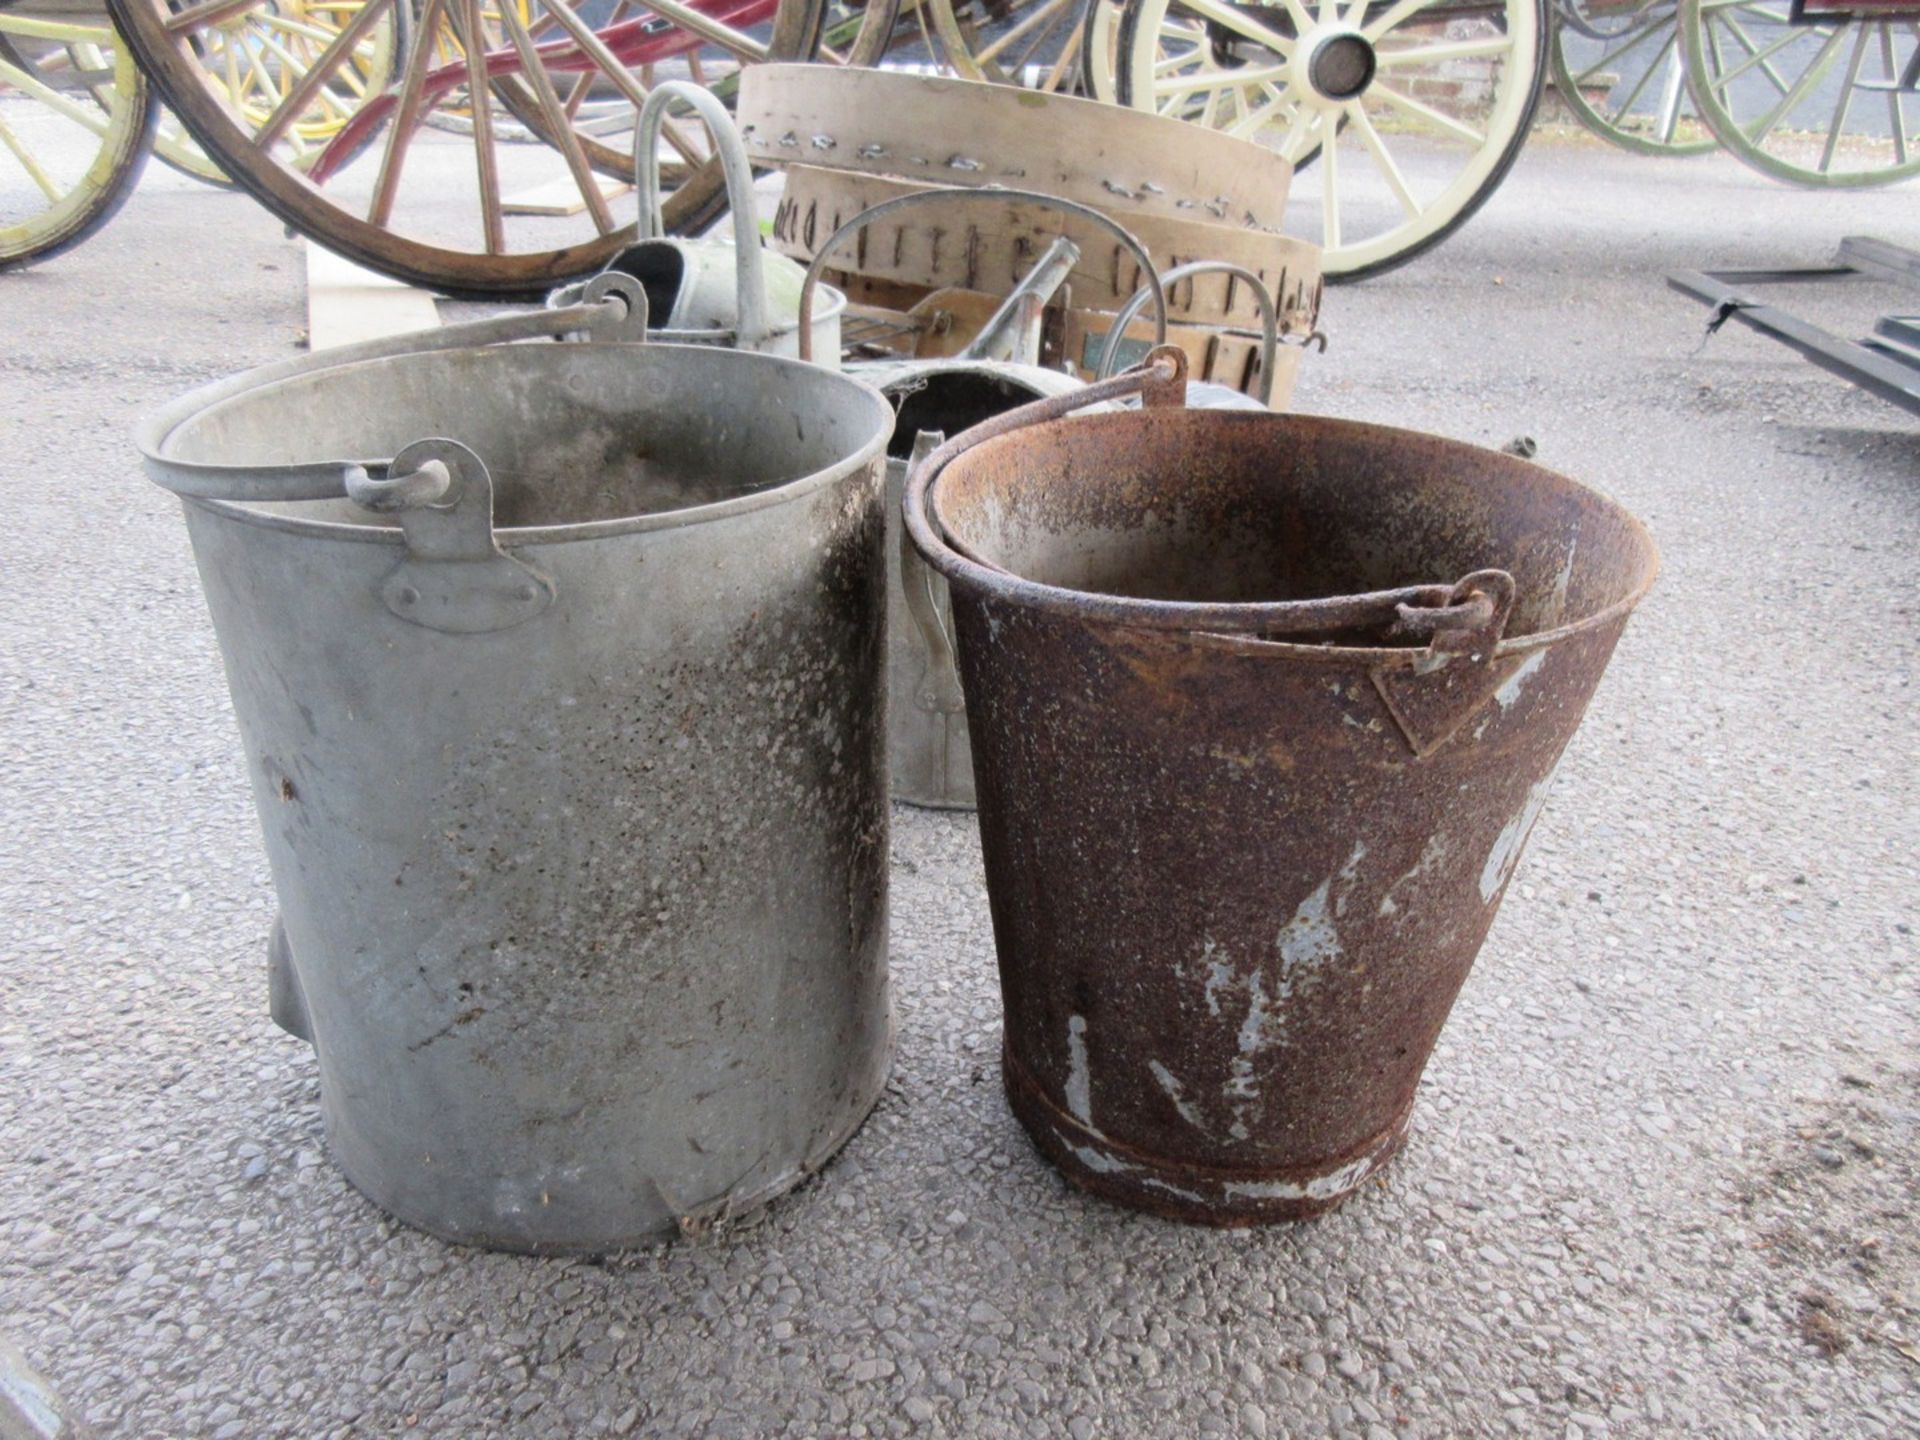 A metal fire bucket together with a galvanised pot or boiler